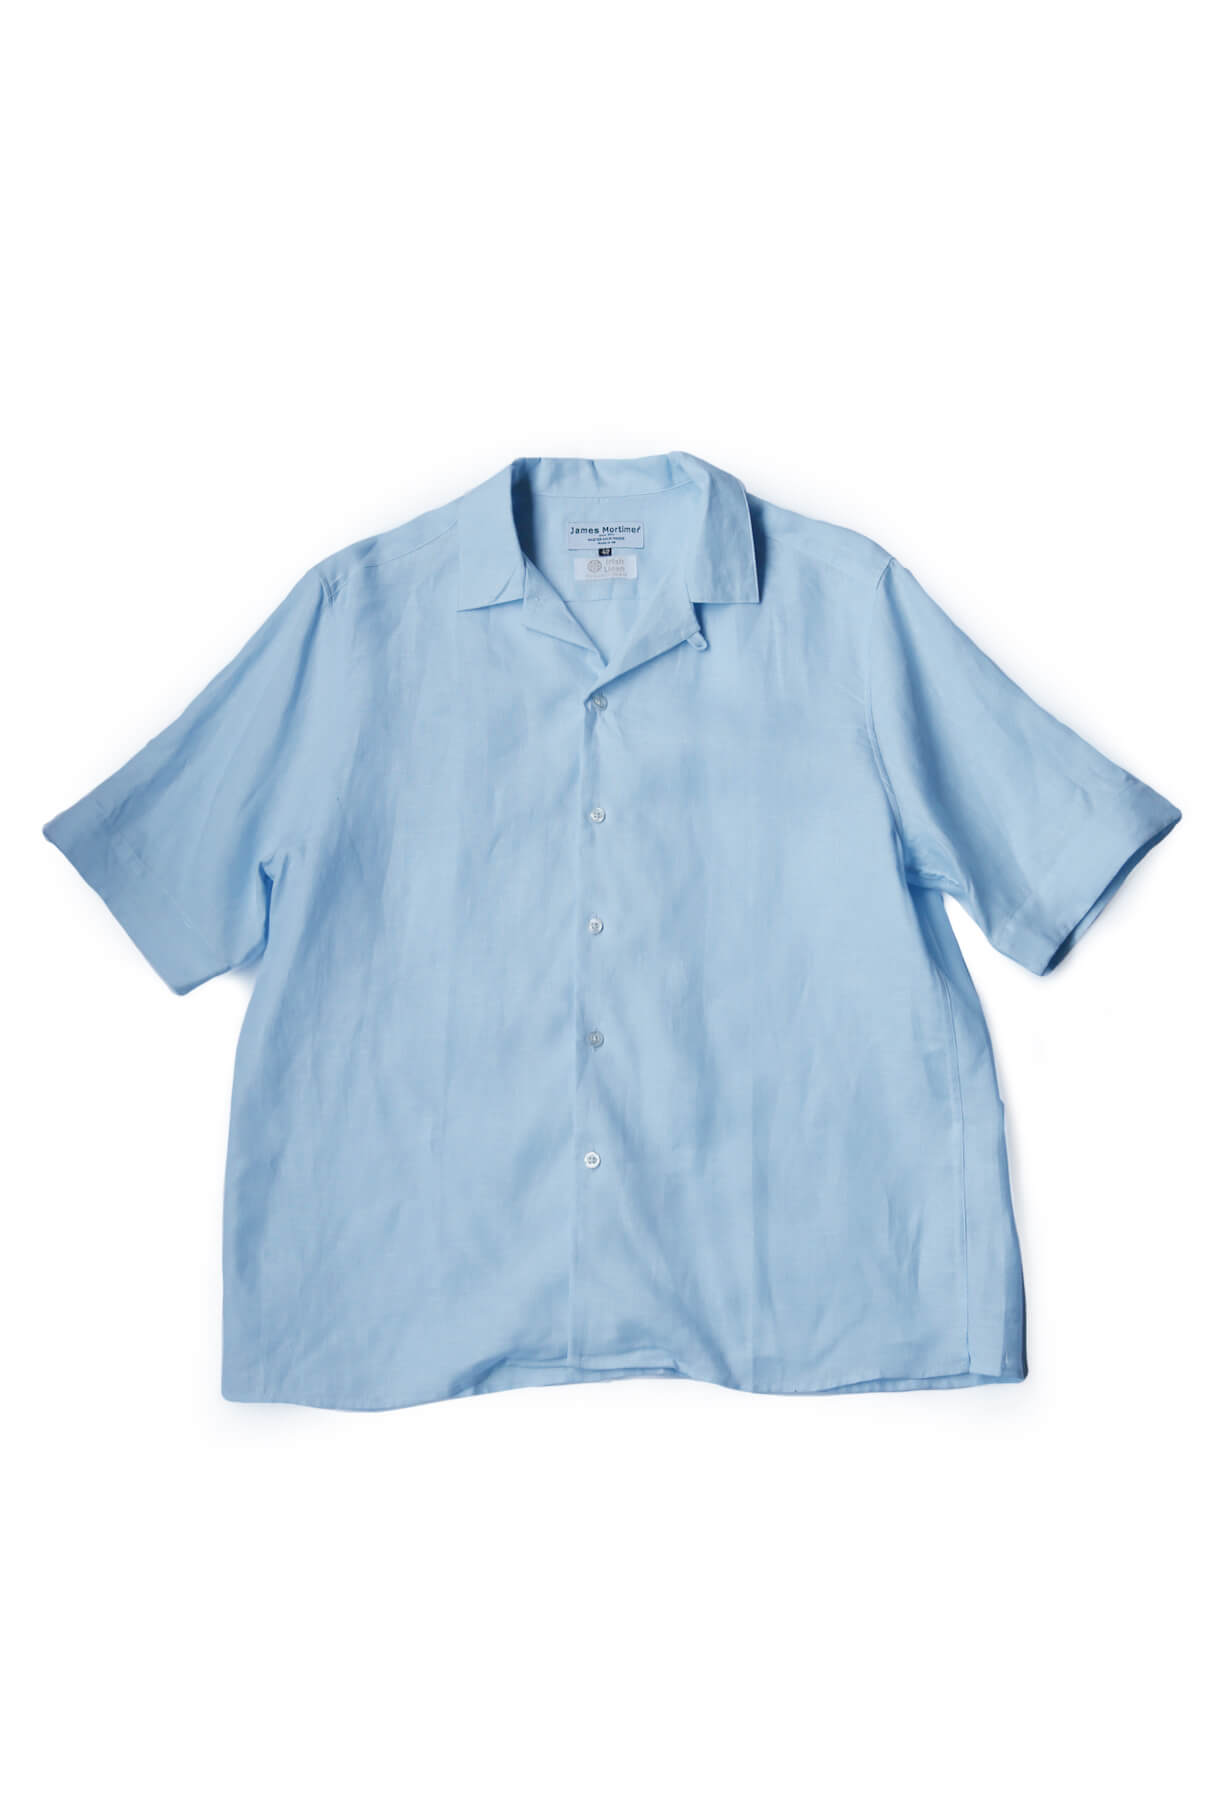 OPEN COLLARED SHIRT - BABY BLUE